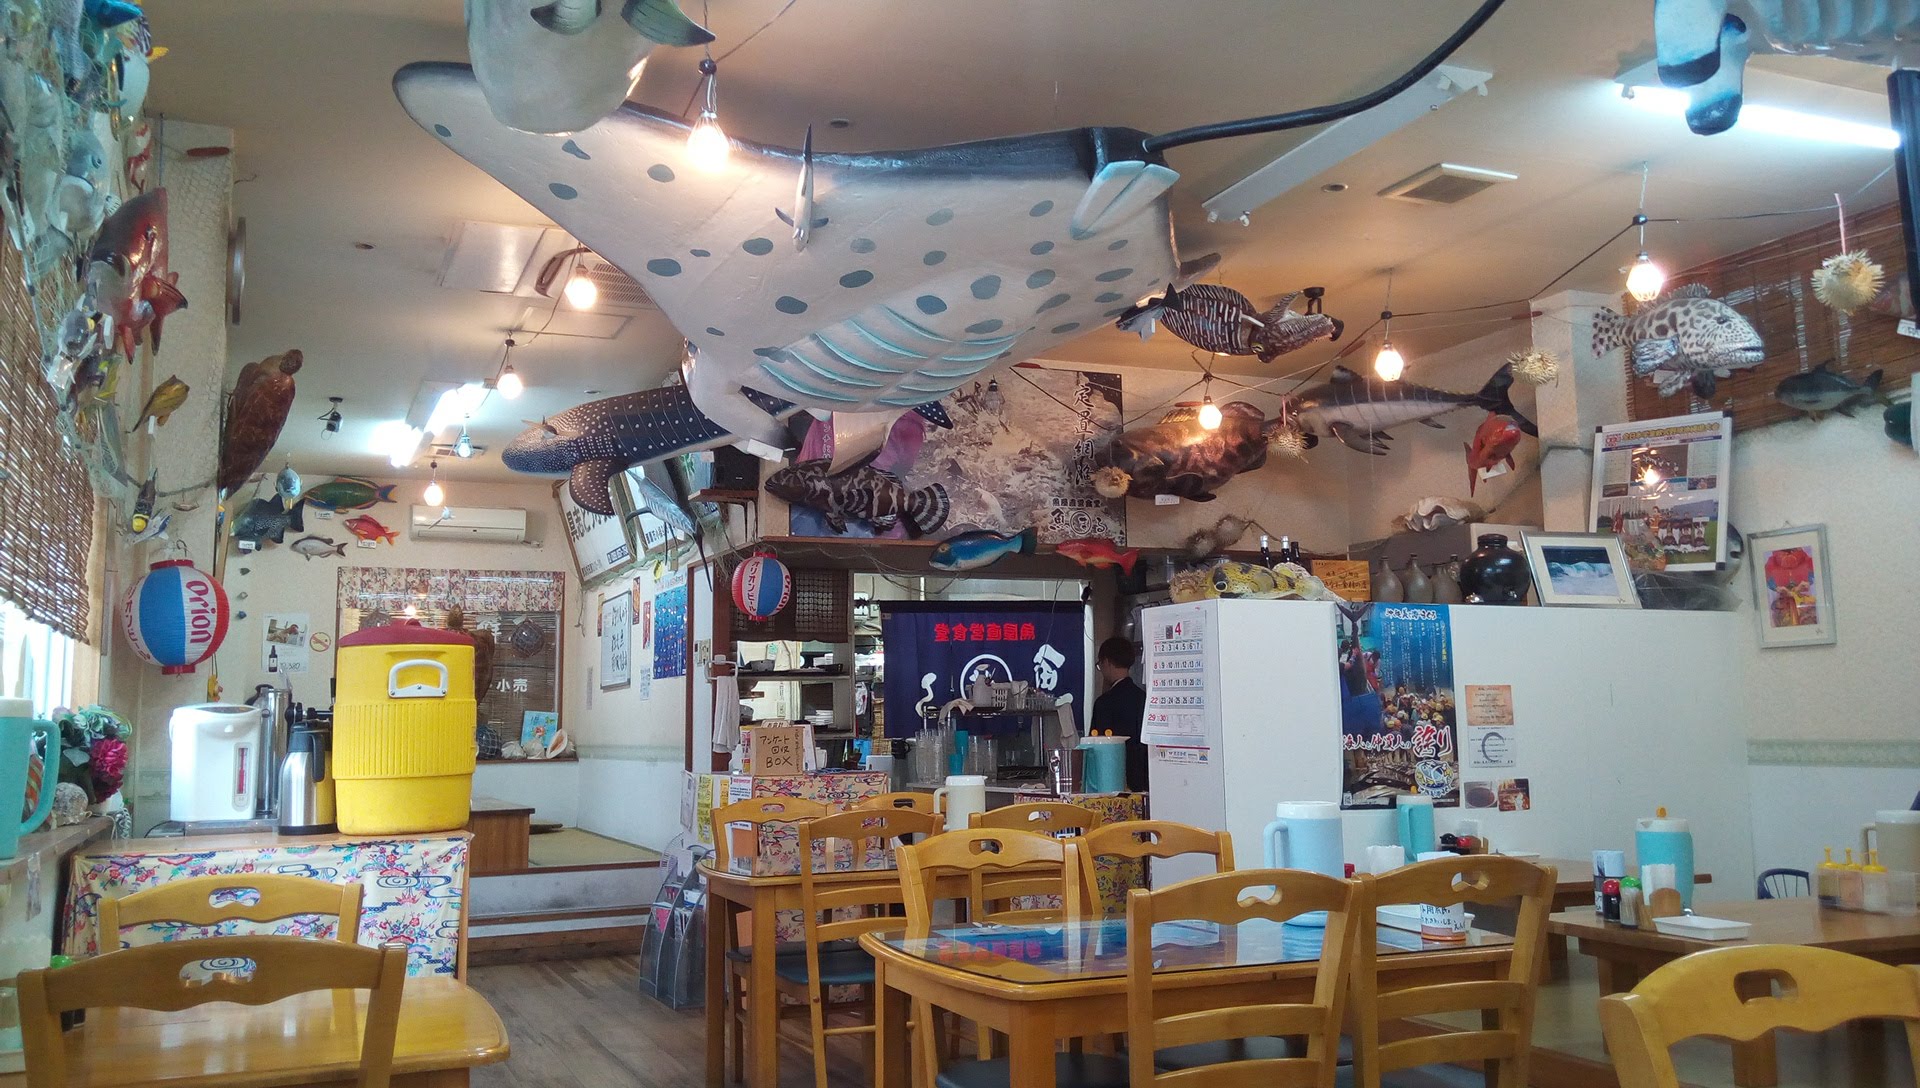 The inside of the shop is decorated with a lot of fish models